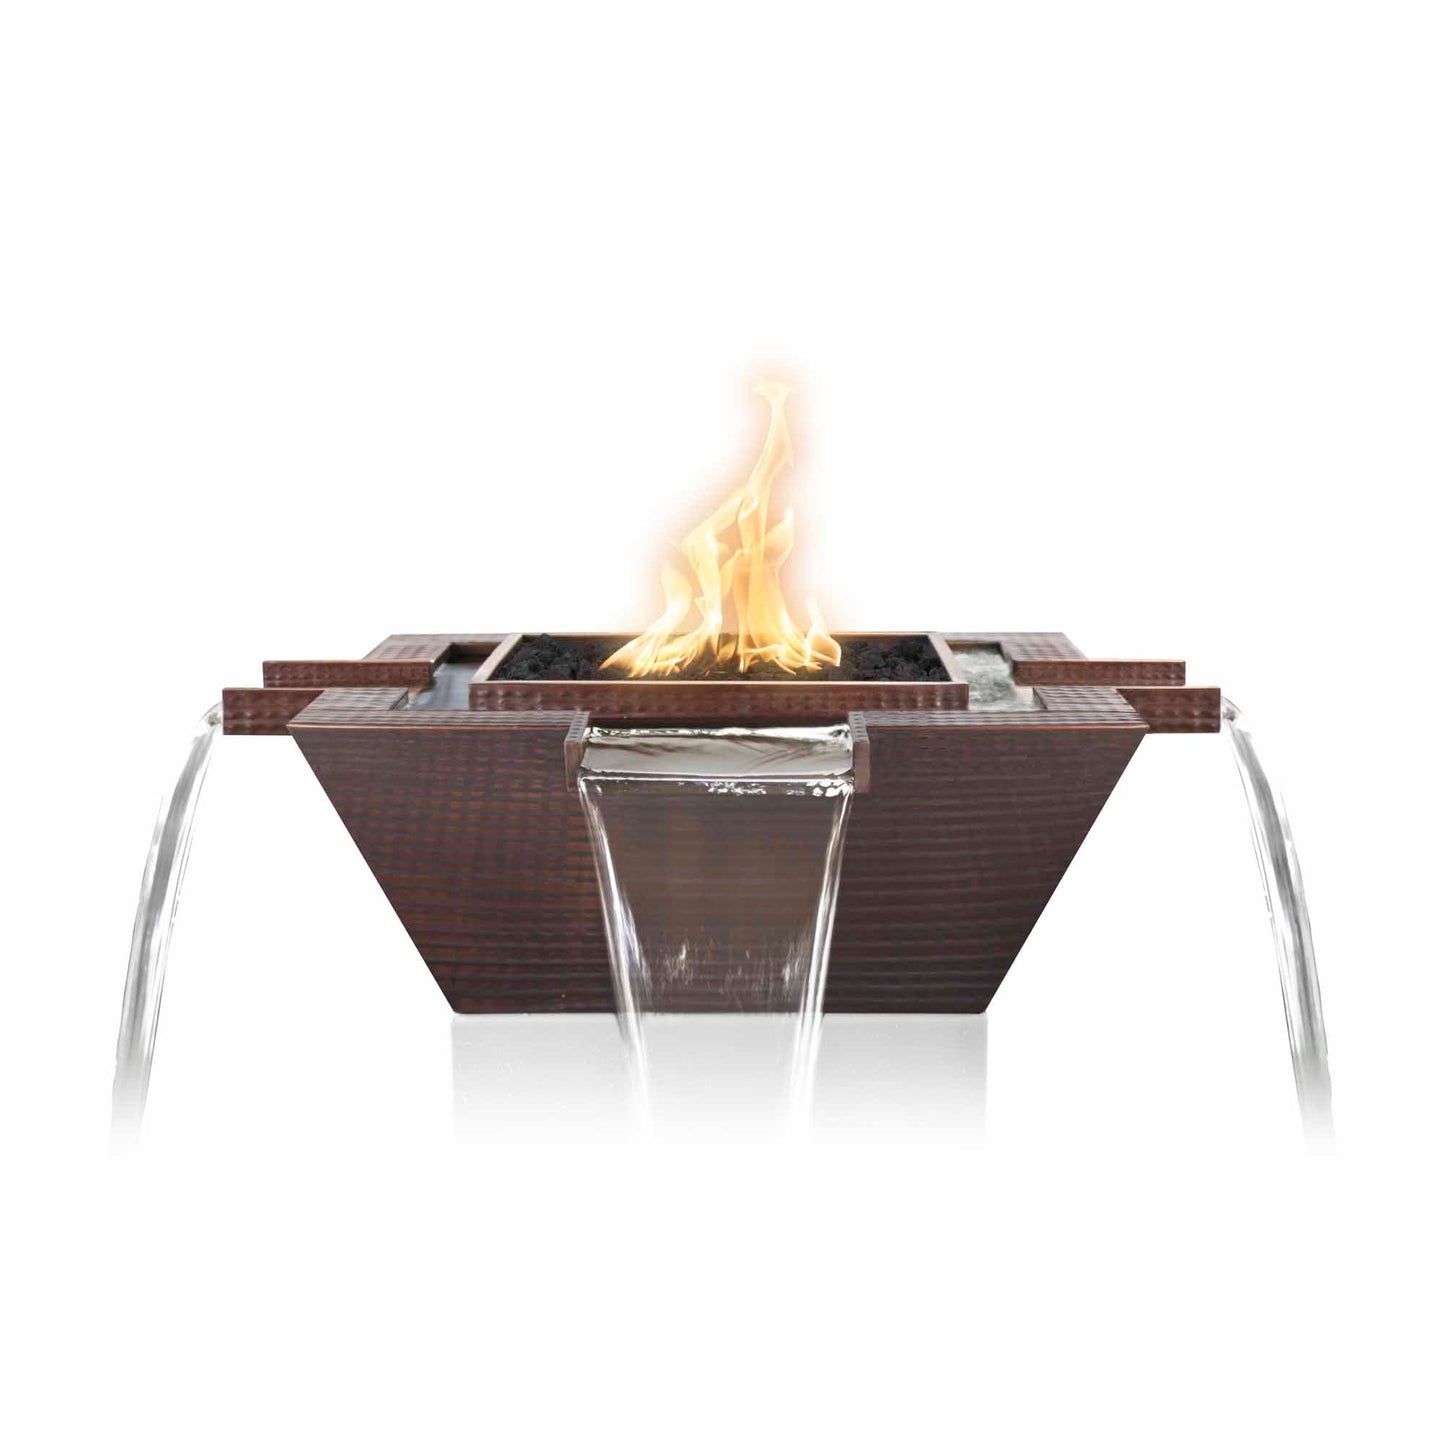 The Outdoor Plus Square Maya 30" Stainless Steel Liquid Propane Fire & Water Bowl 4-Way Spill with Match Lit Ignition